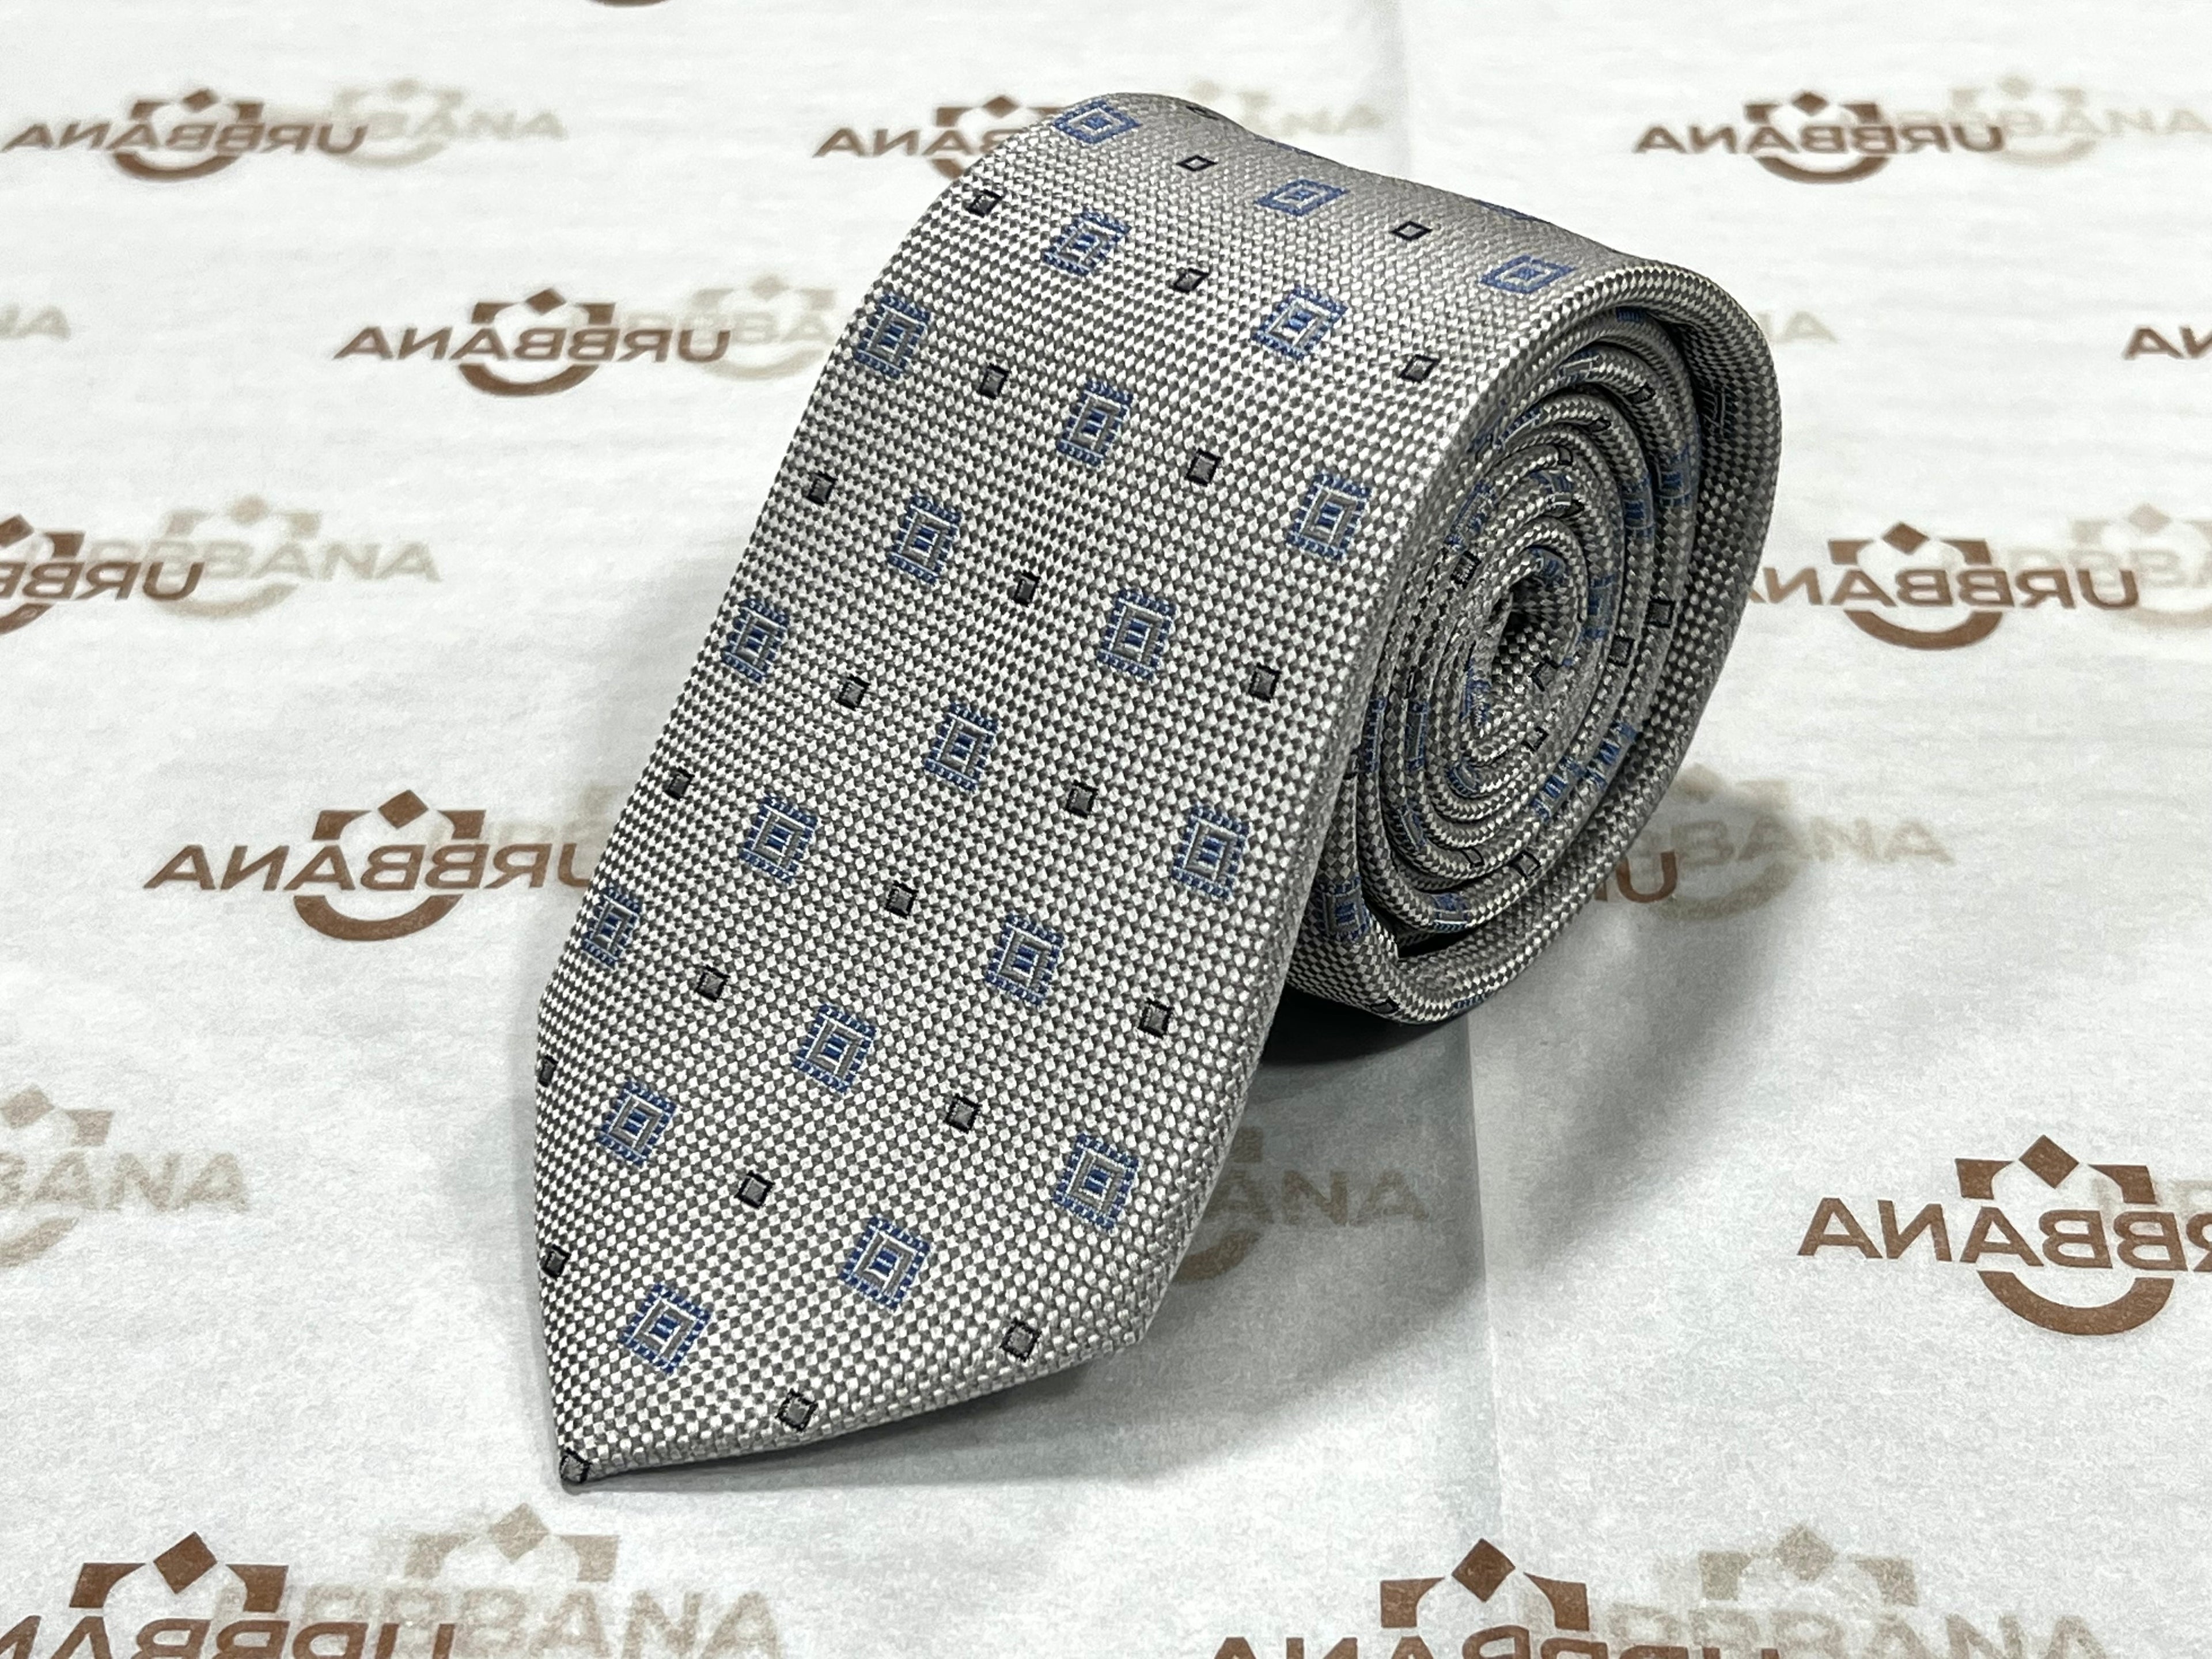 The Steve Silk Tie - Made in Italy